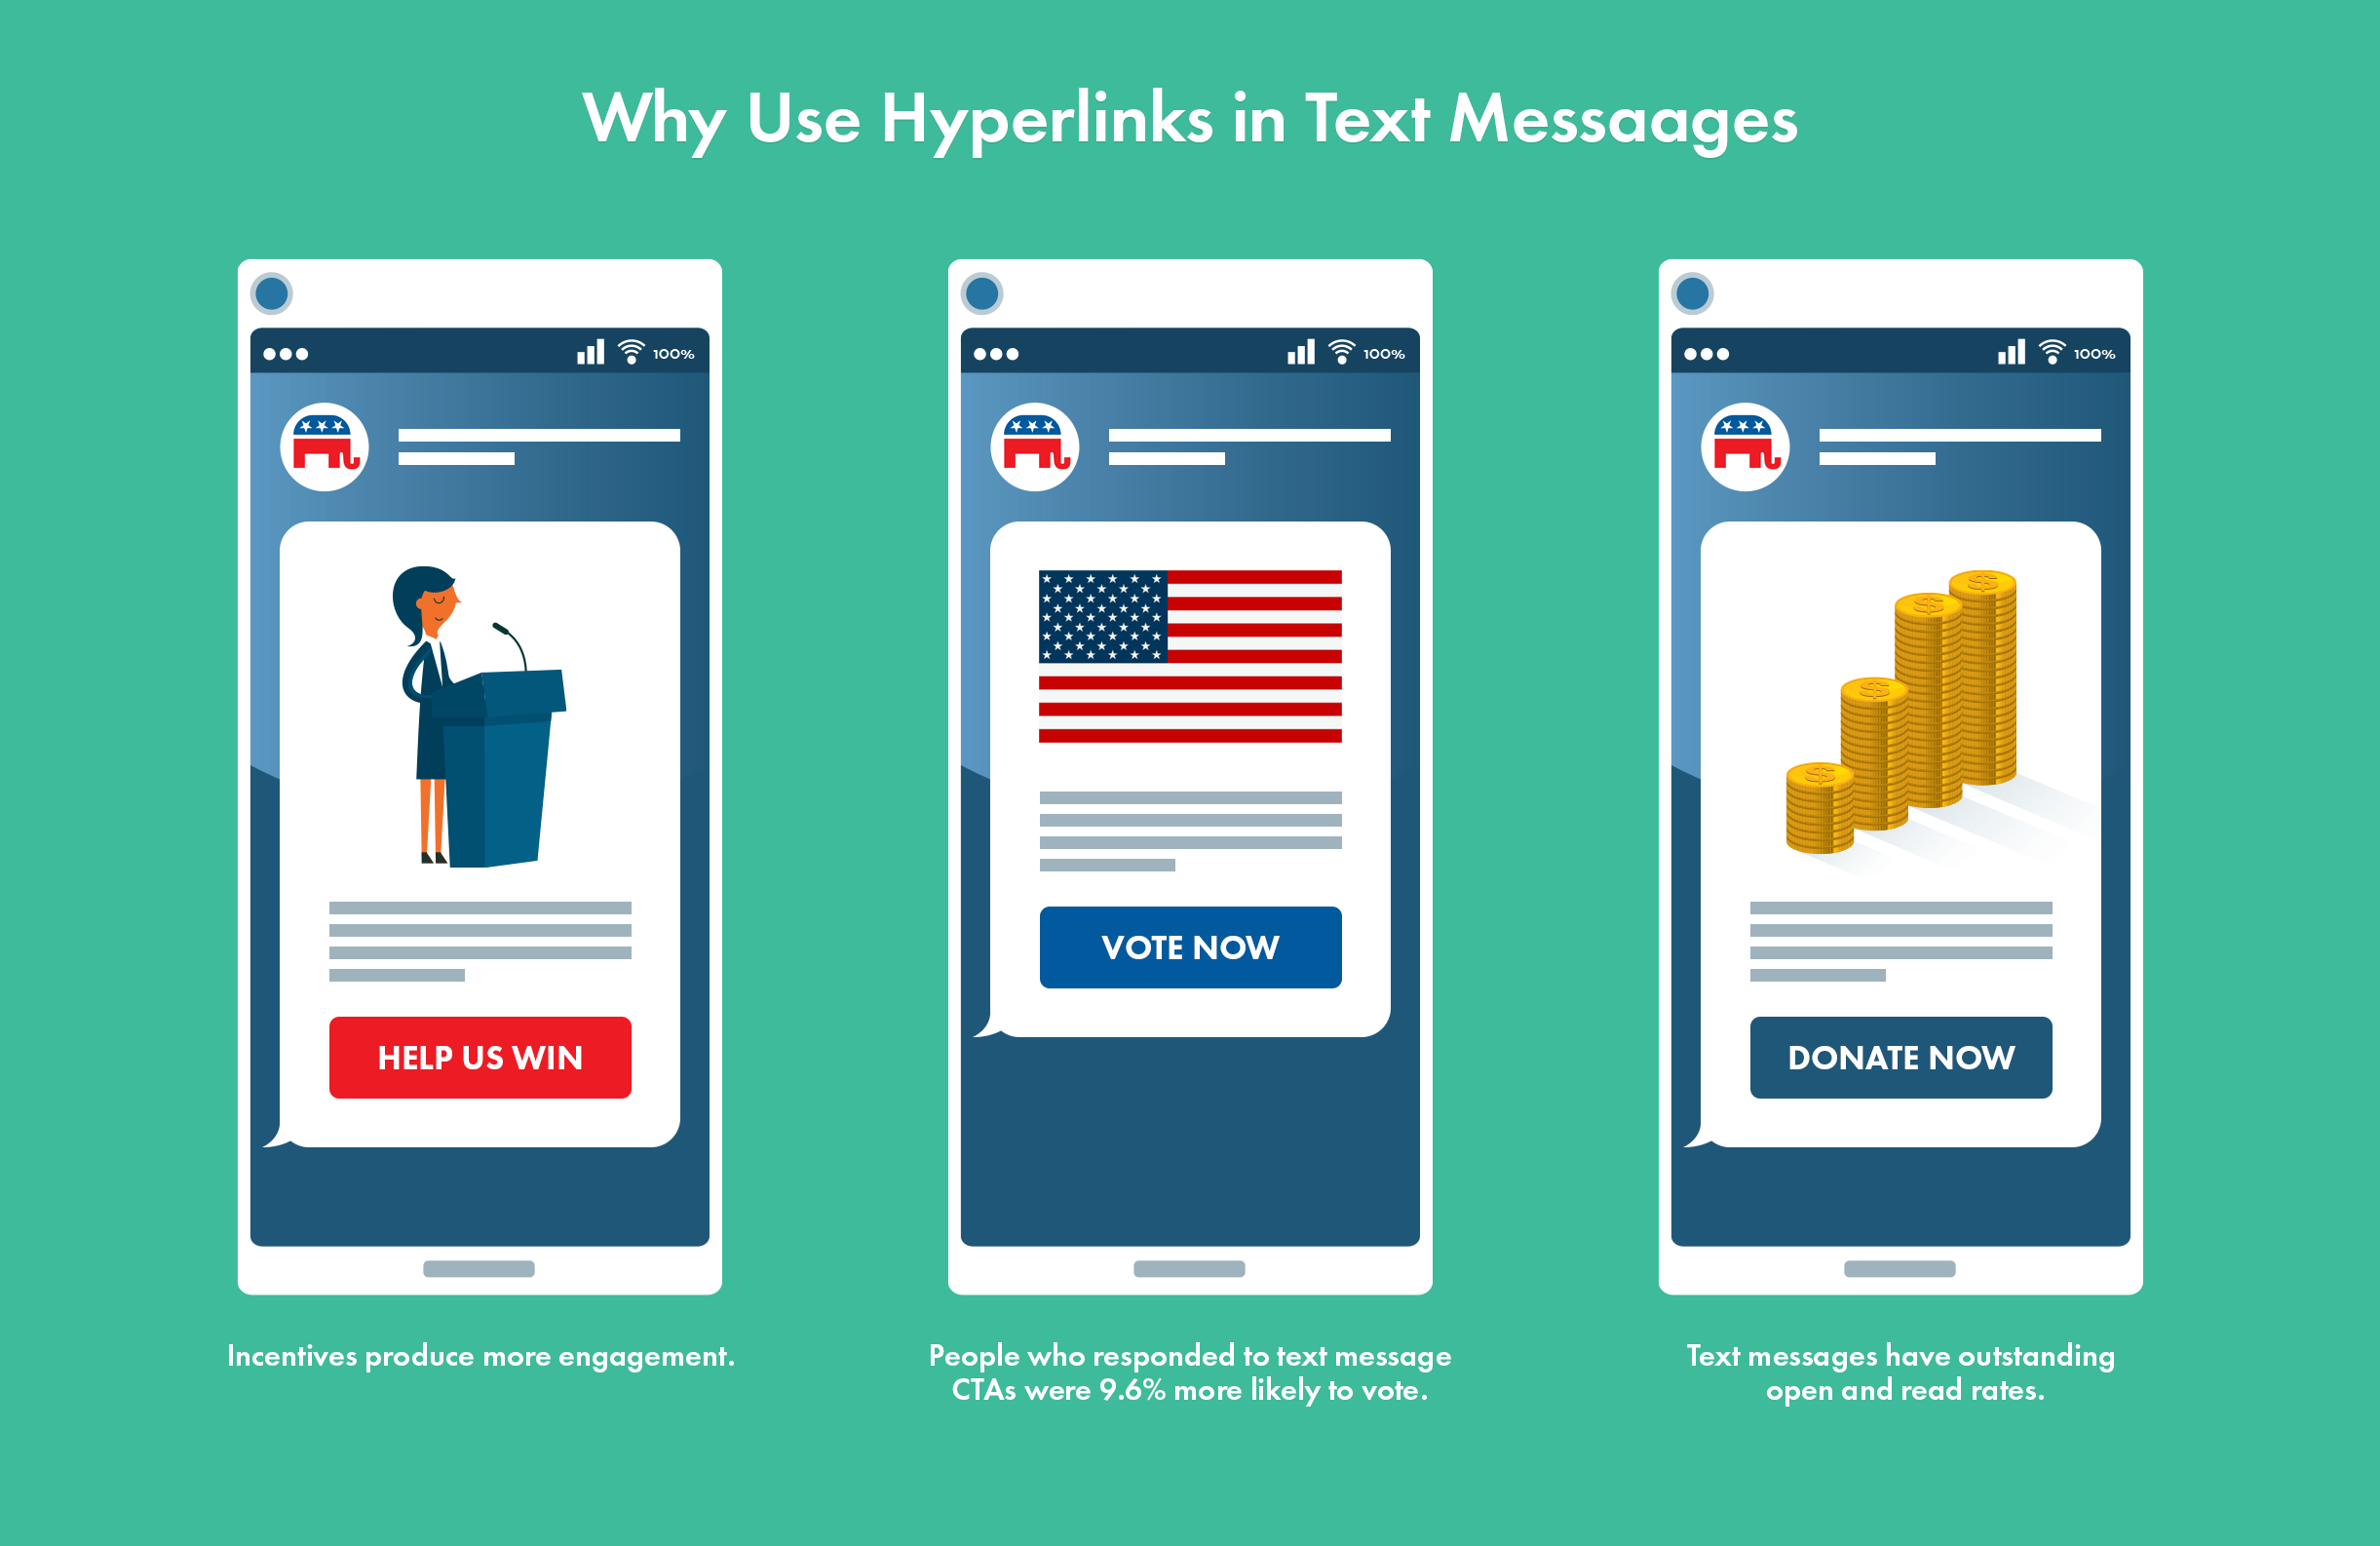 Can You Put Hyperlinks in Political Text Messages